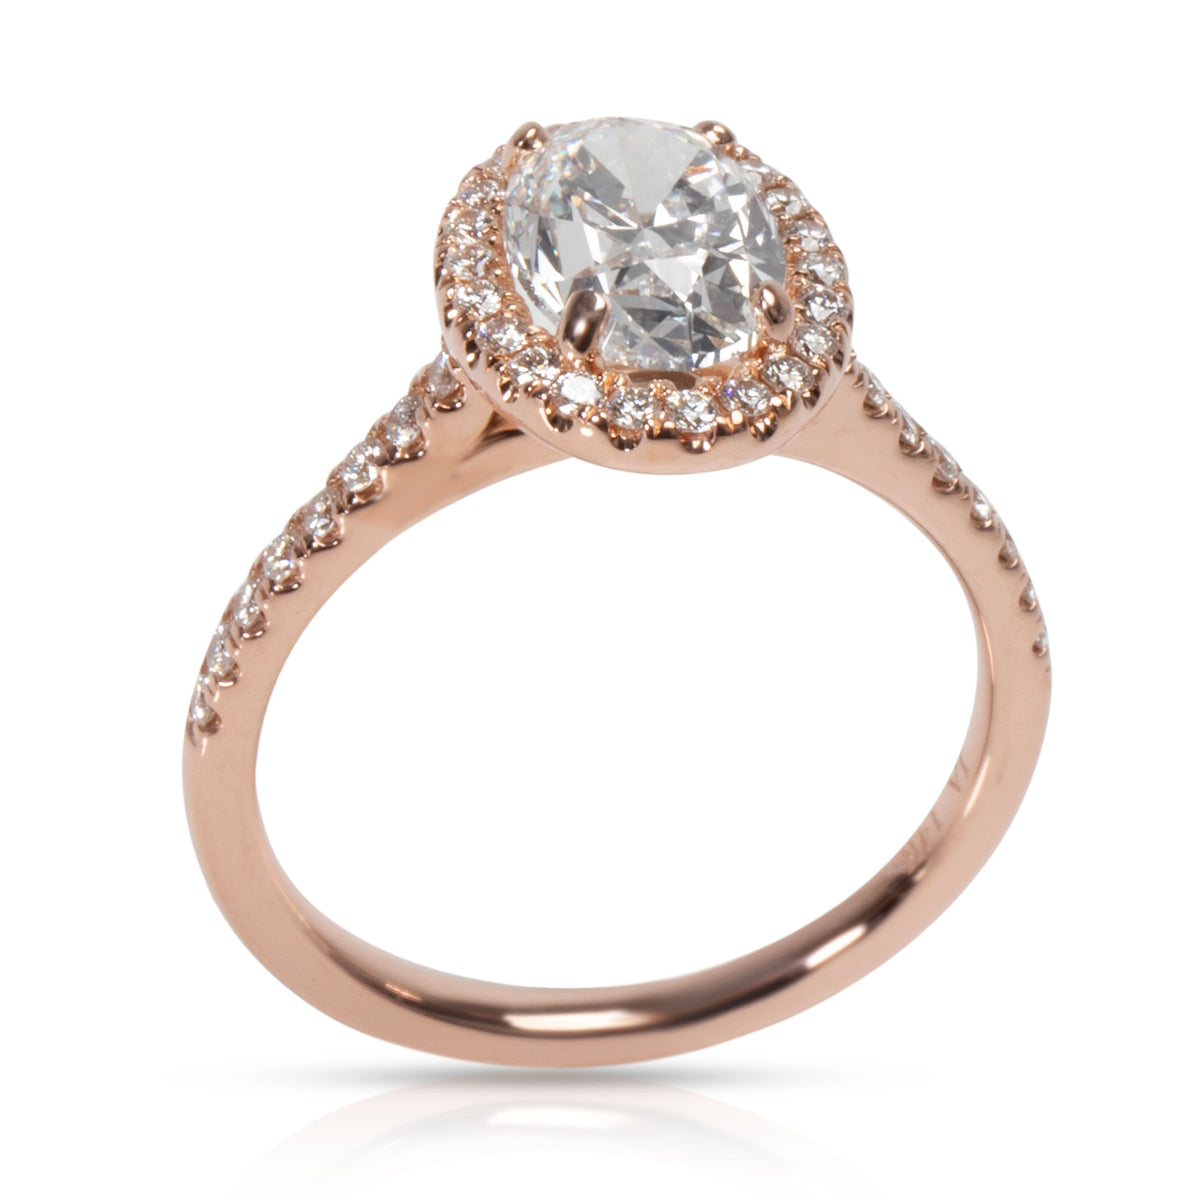 James Allen Oval Halo Diamond Engagement Ring in 14K Rose Gold GIA F SI1 1.6 CTW